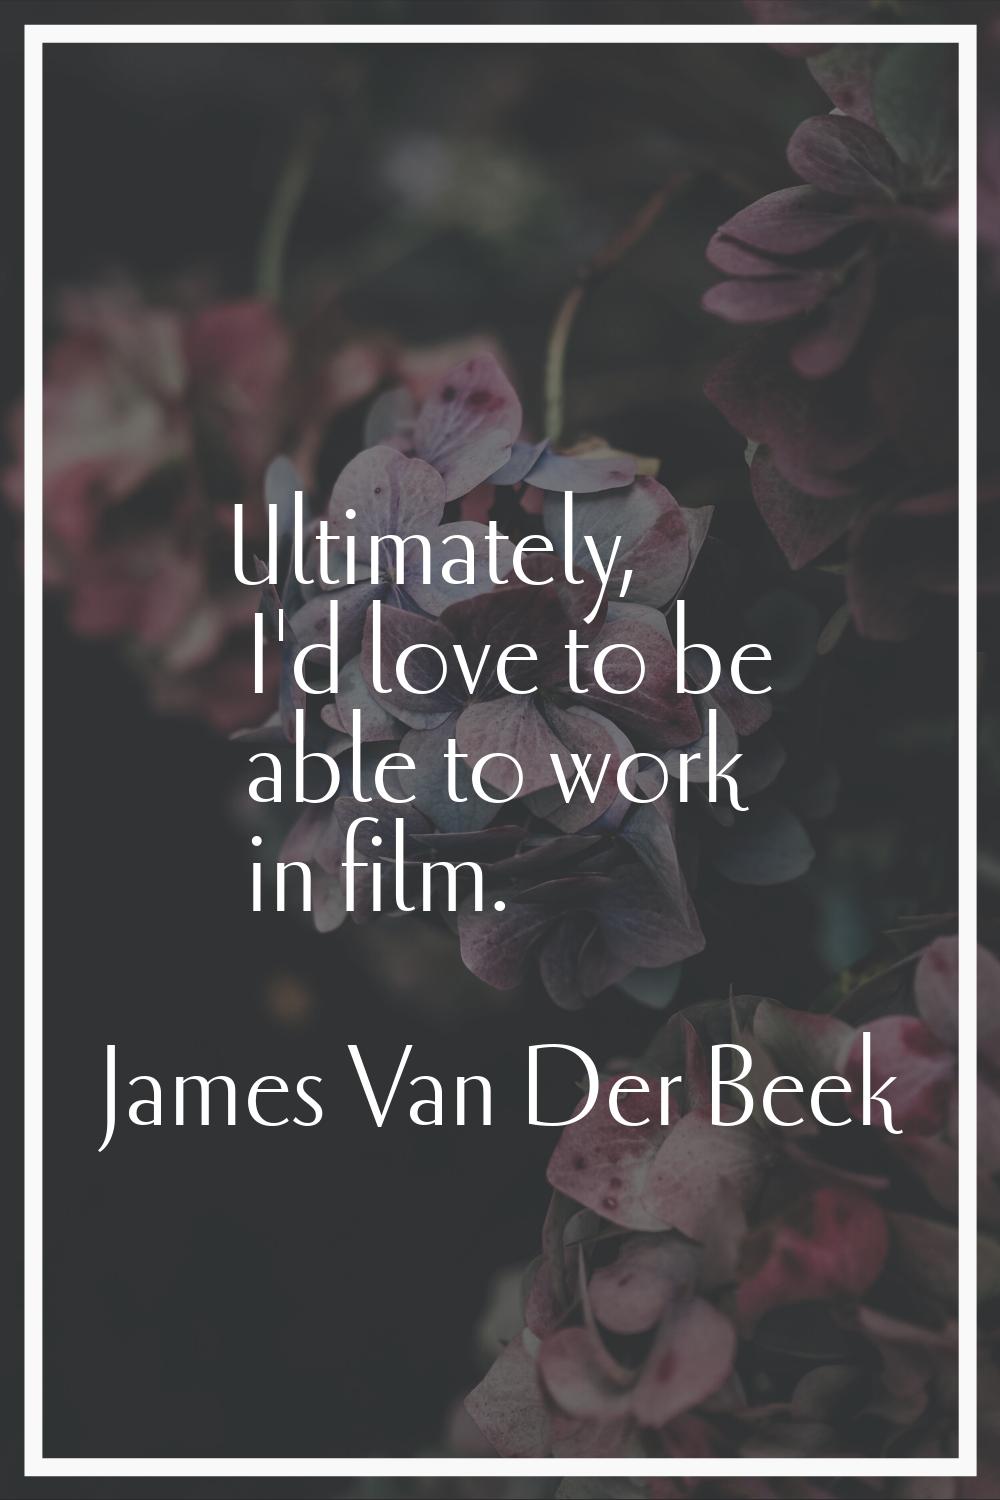 Ultimately, I'd love to be able to work in film.